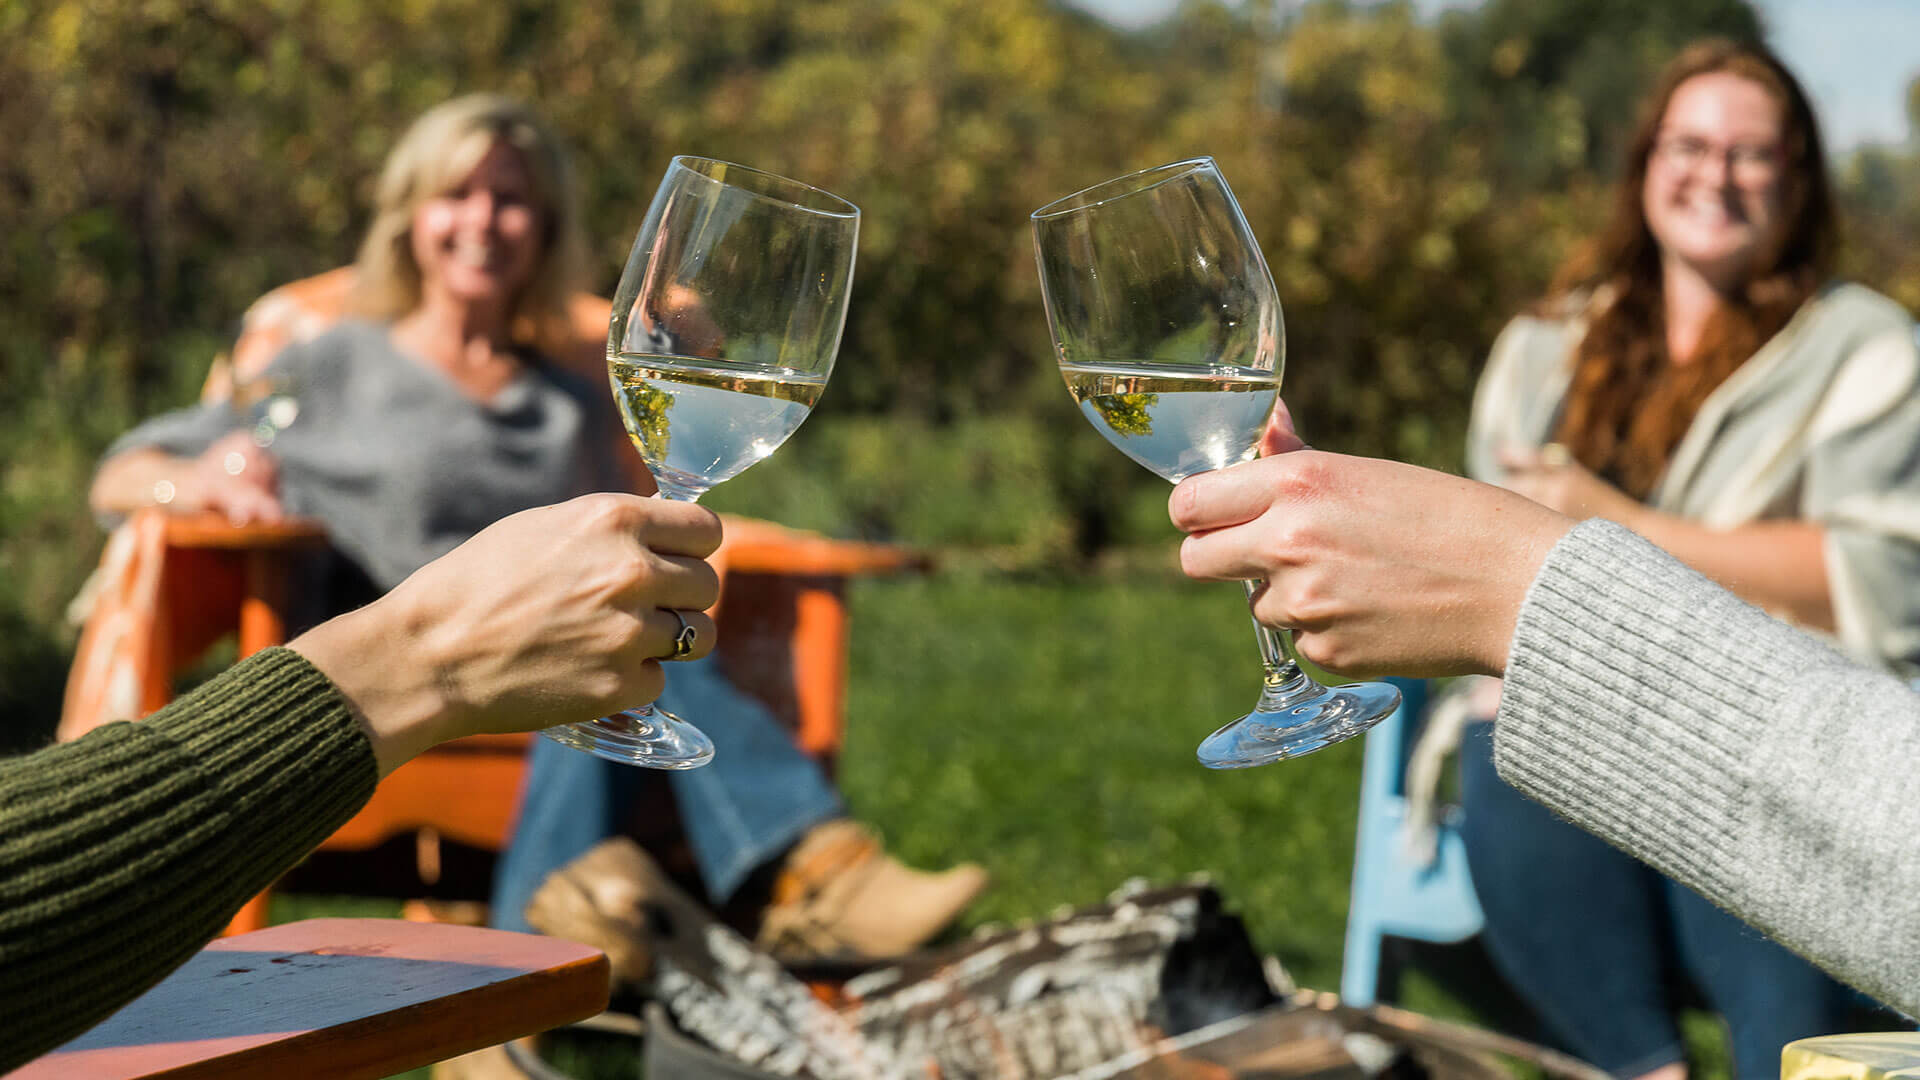 Group of friends celebrating with a glass of white wine while relaxing by a campfire.